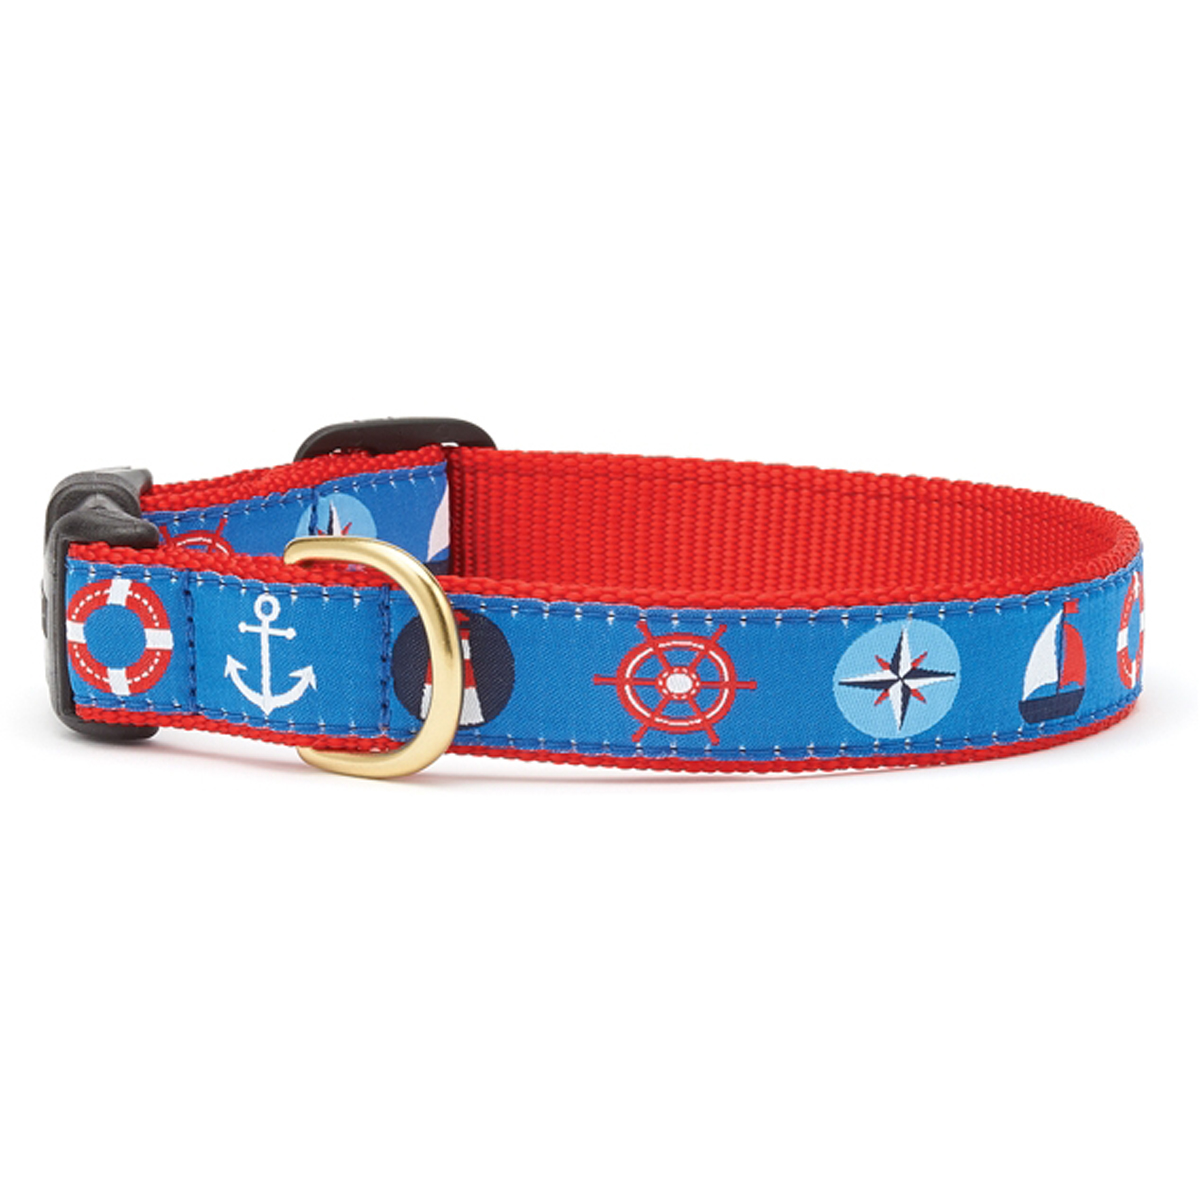 First Mate Dog Collar by Up Country